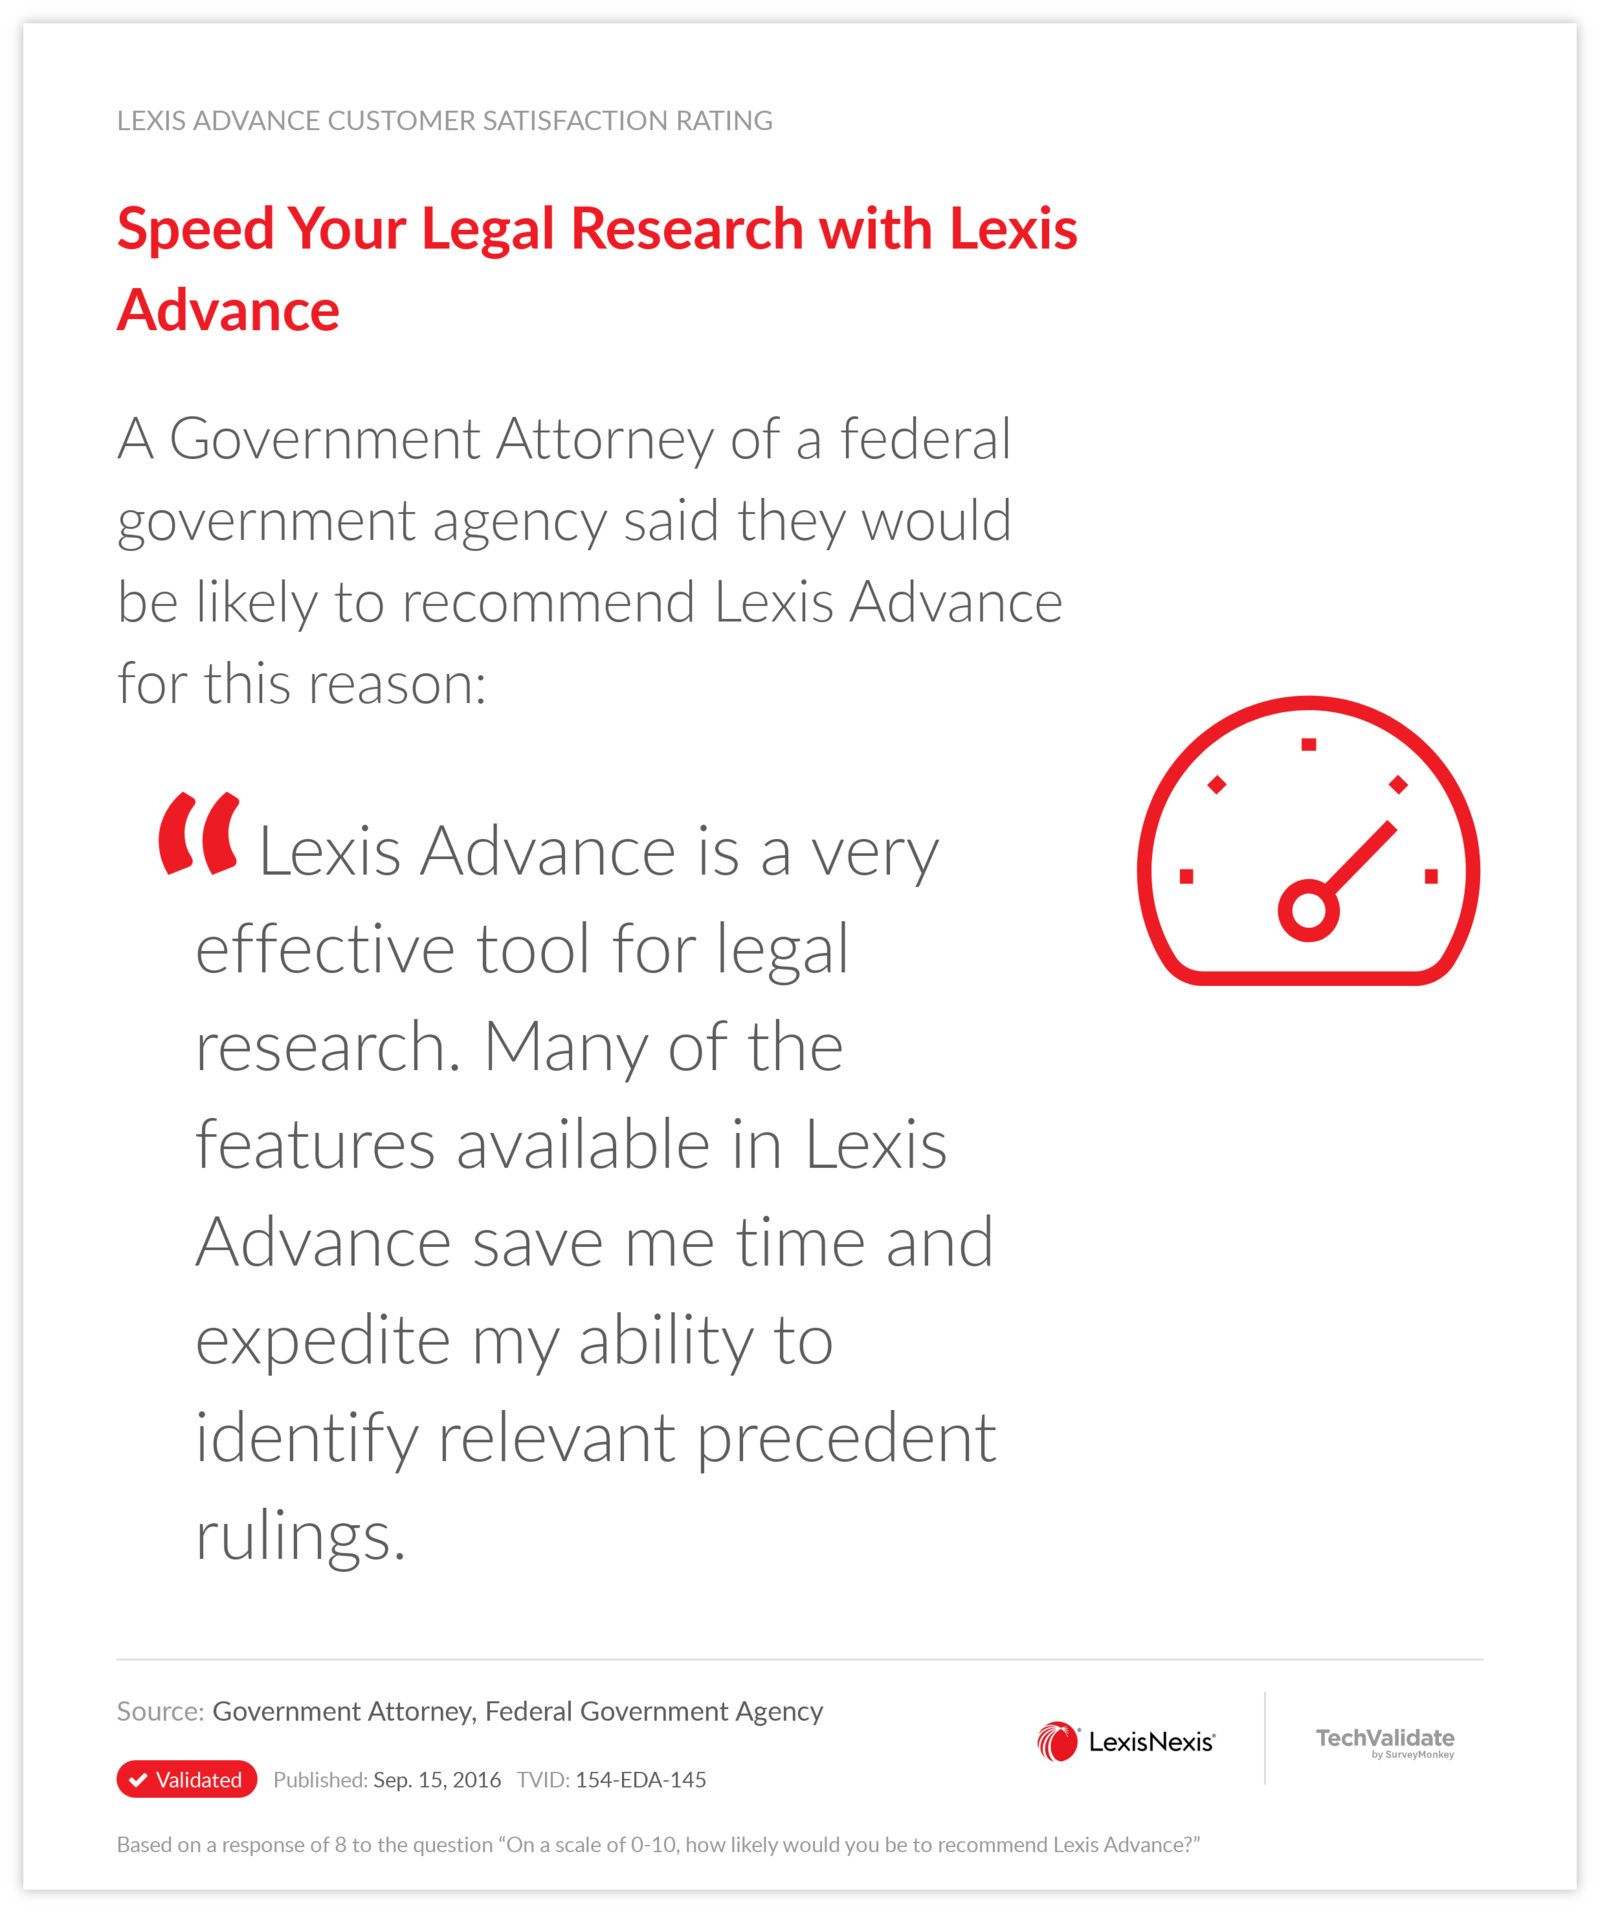 Speed Your Legal Research with Lexis Advance